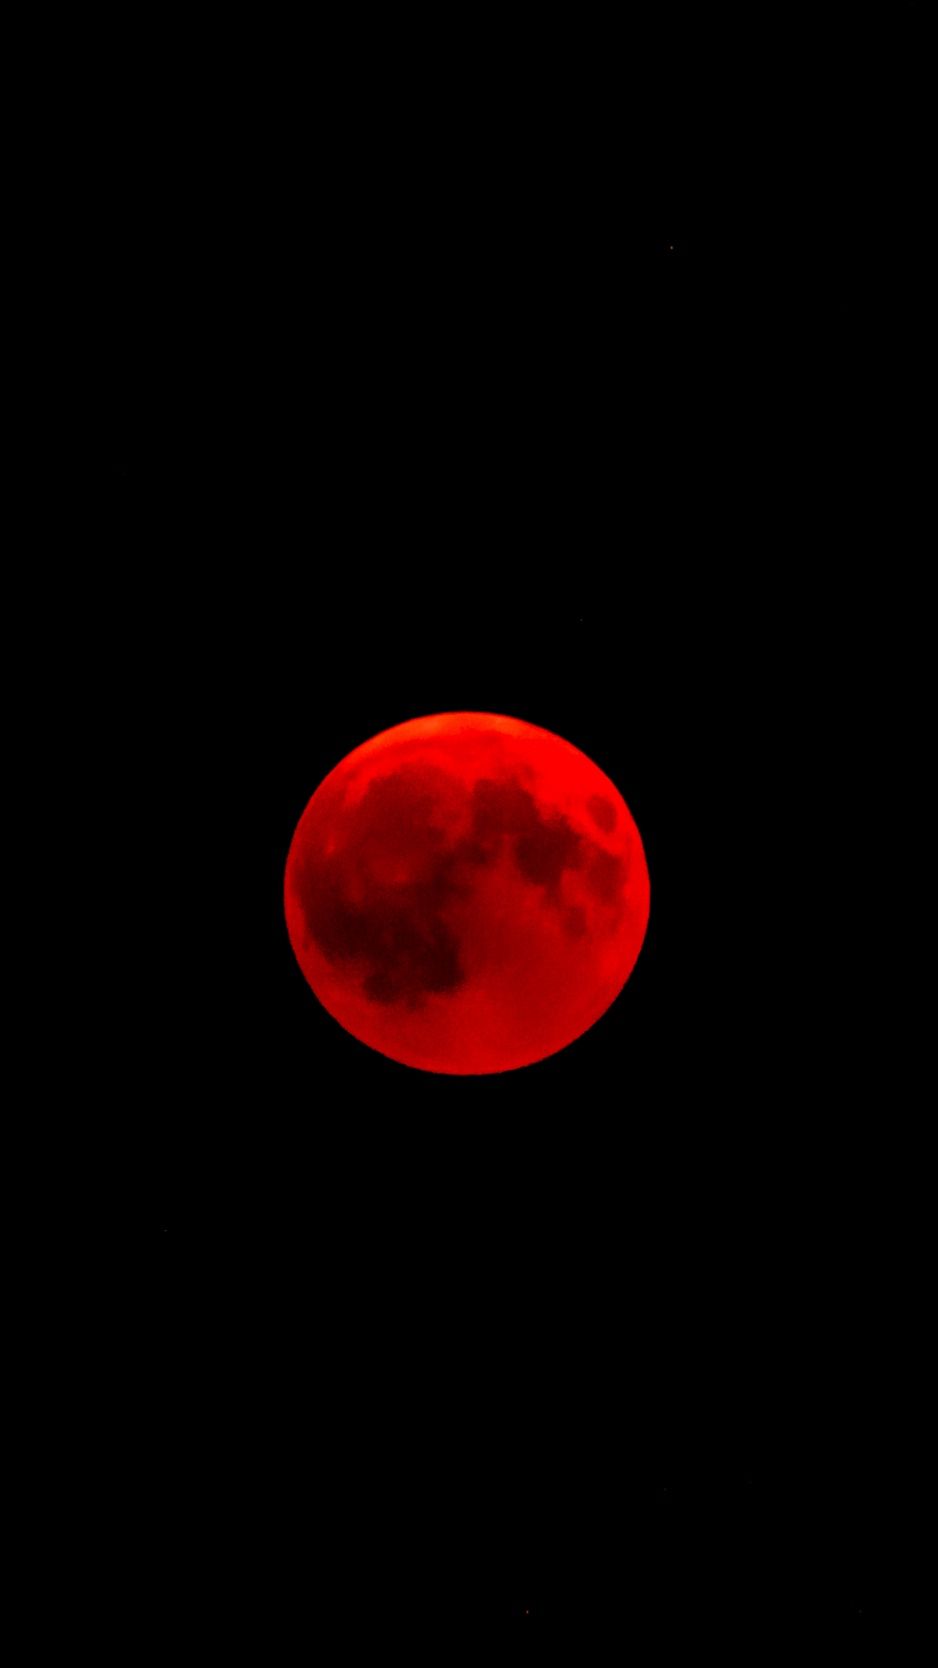 Download wallpaper 938x1668 moon, full moon, eclipse, red moon